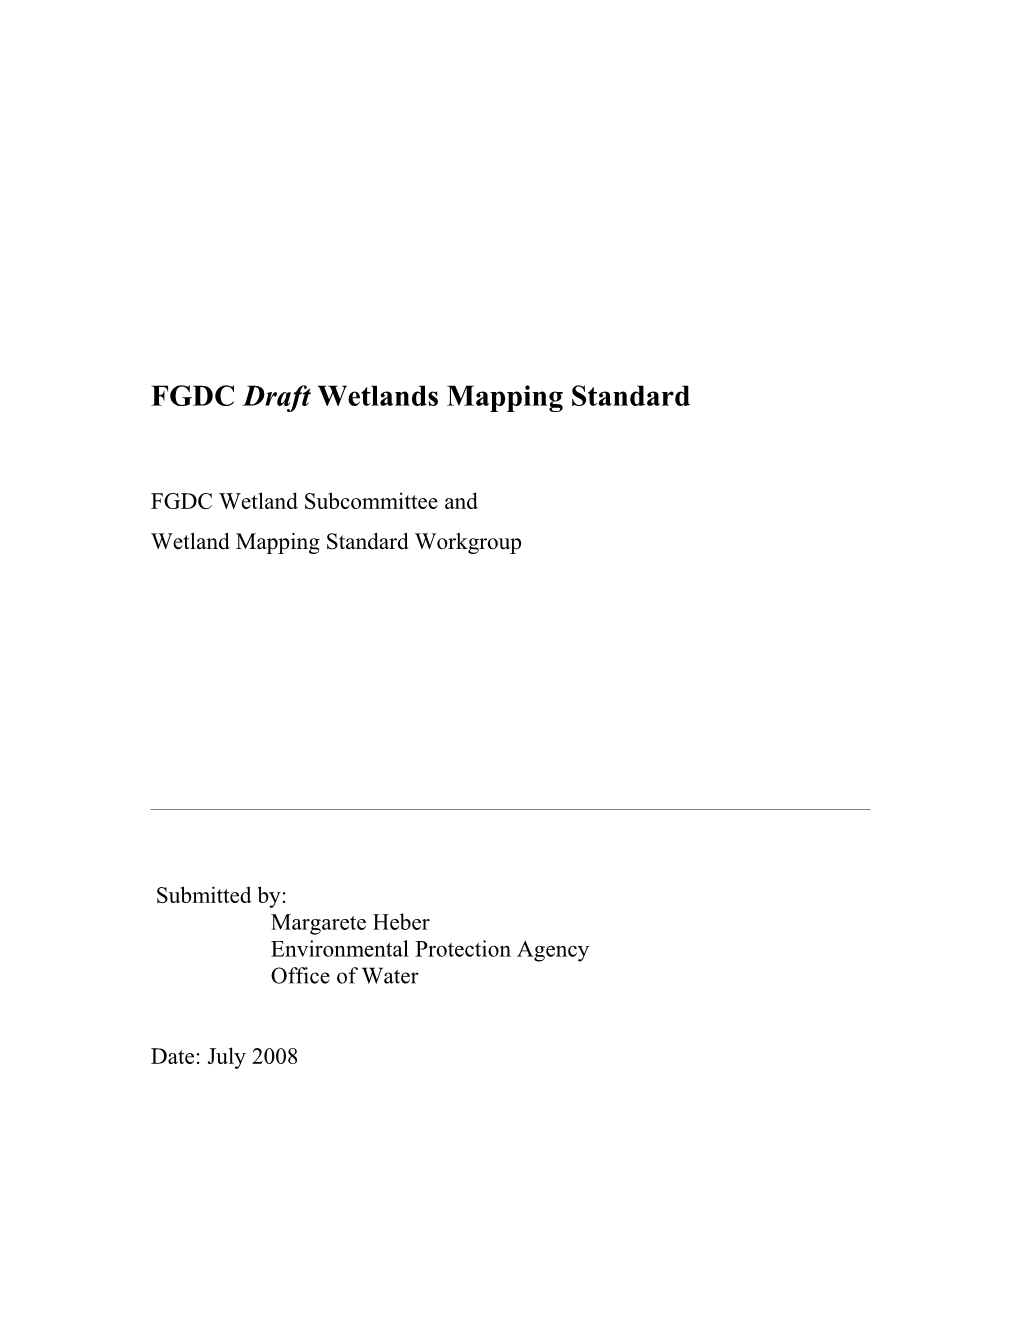 Federal Geographic Data Committee Wetlands Mapping Standard